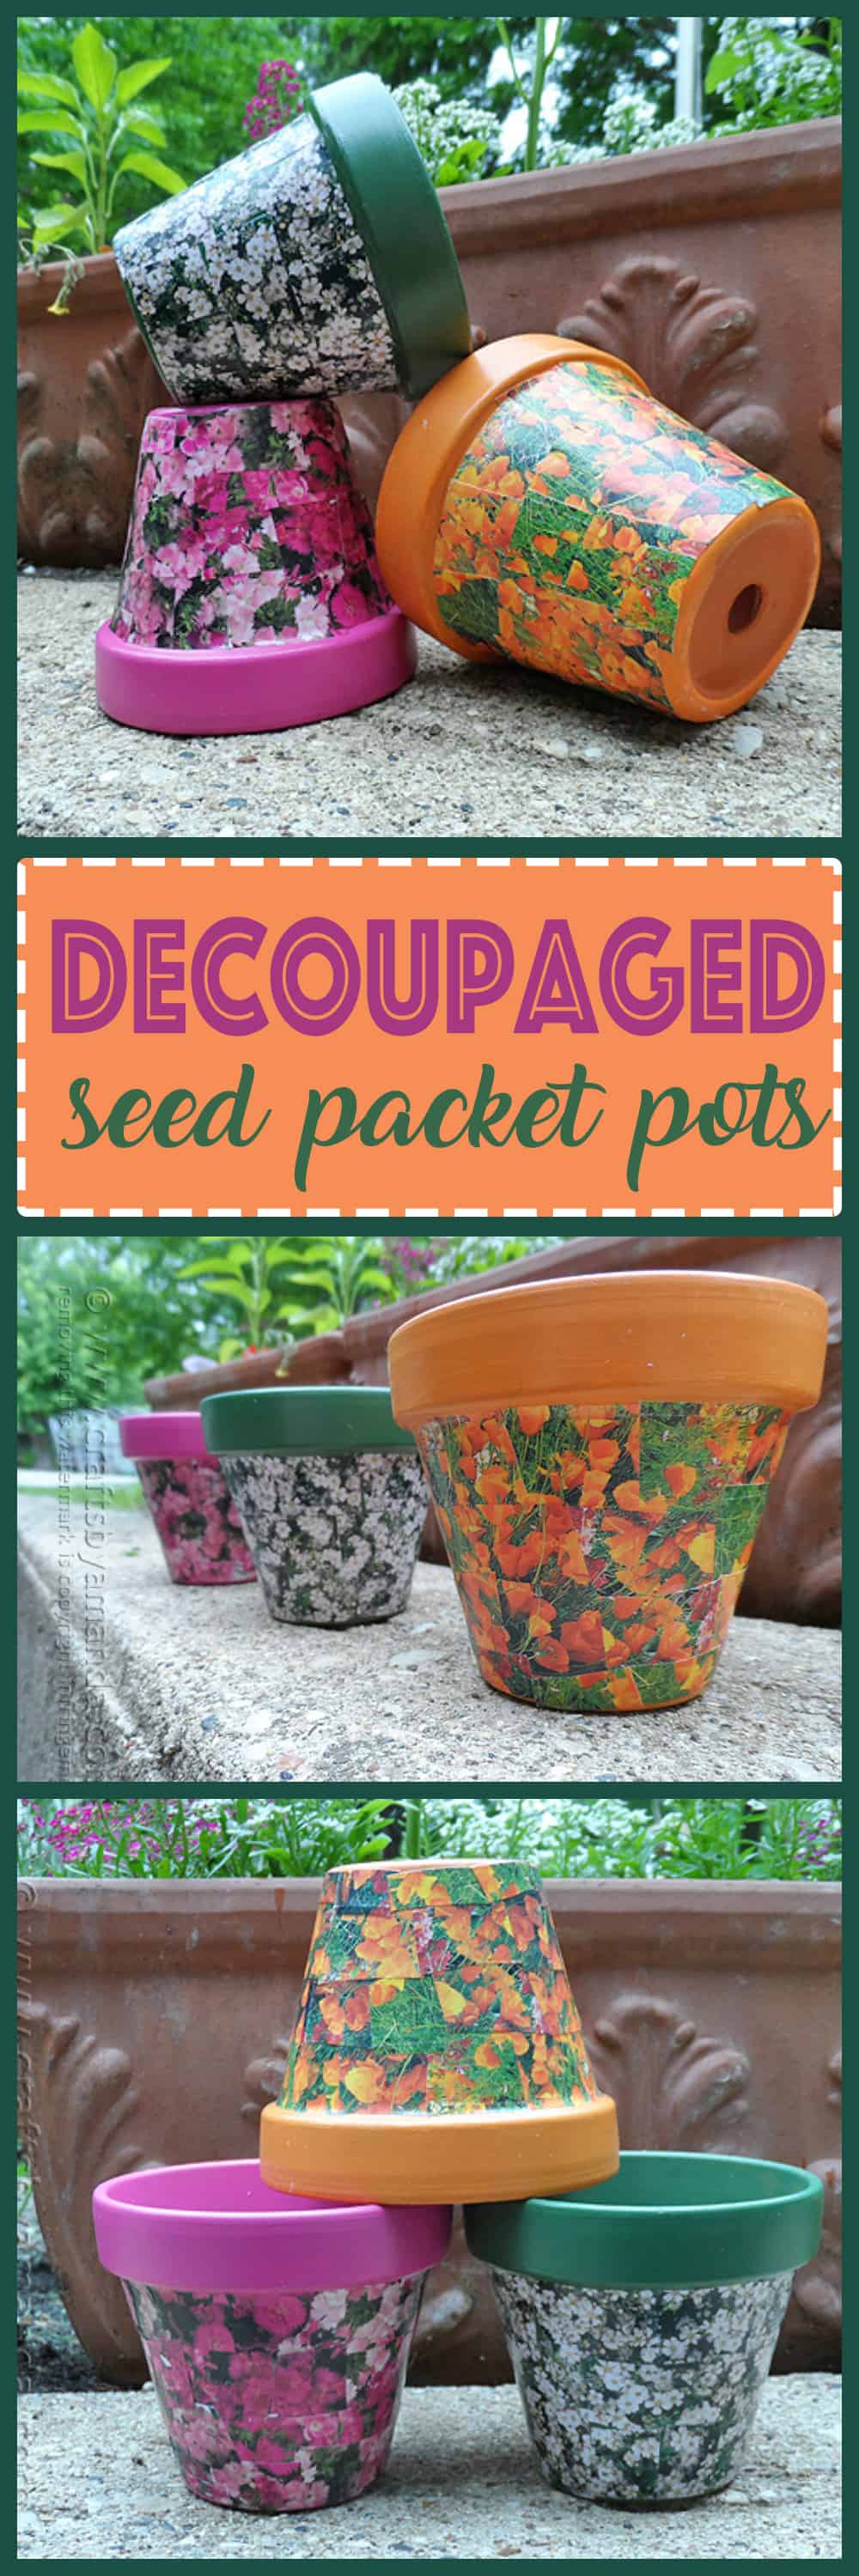 Why not recycle your seed packets and create adorable decoupaged seed packet terra cotta pots for the garden!